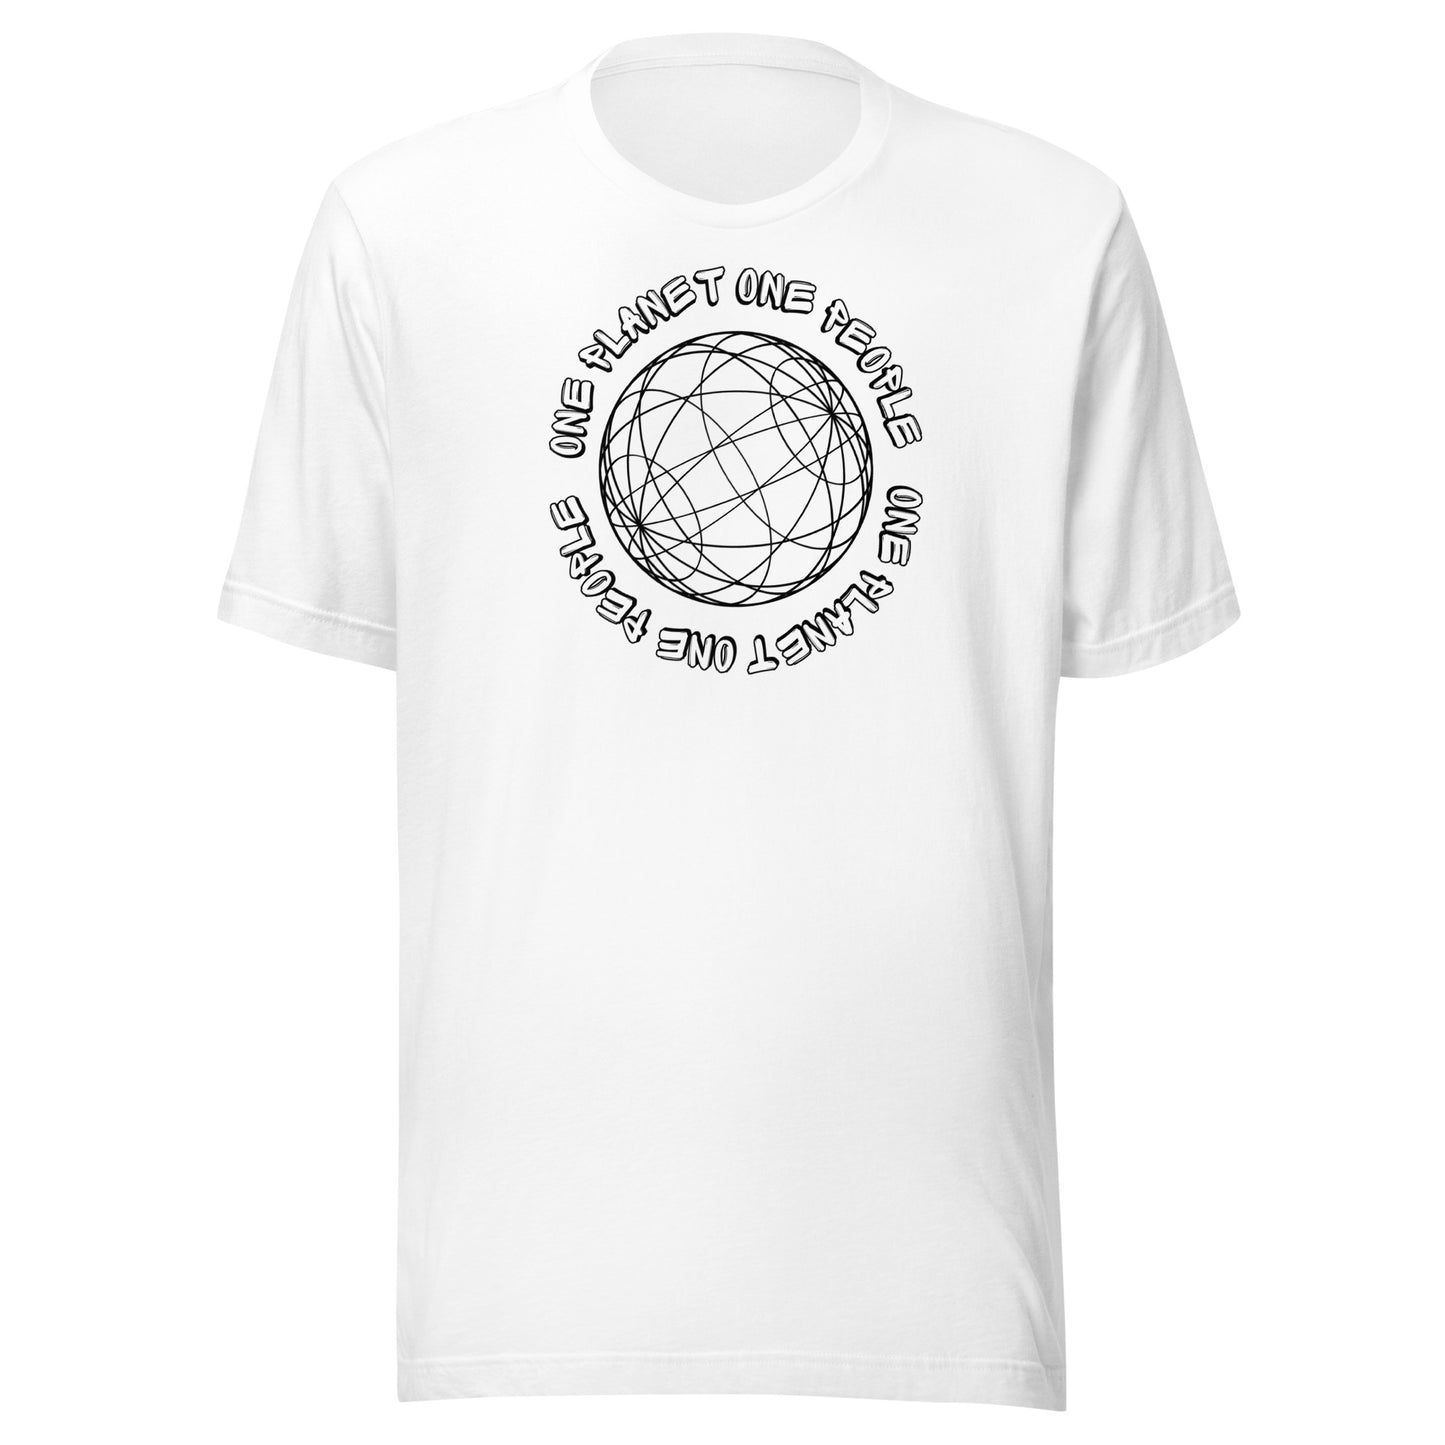 One planet one people t-shirt